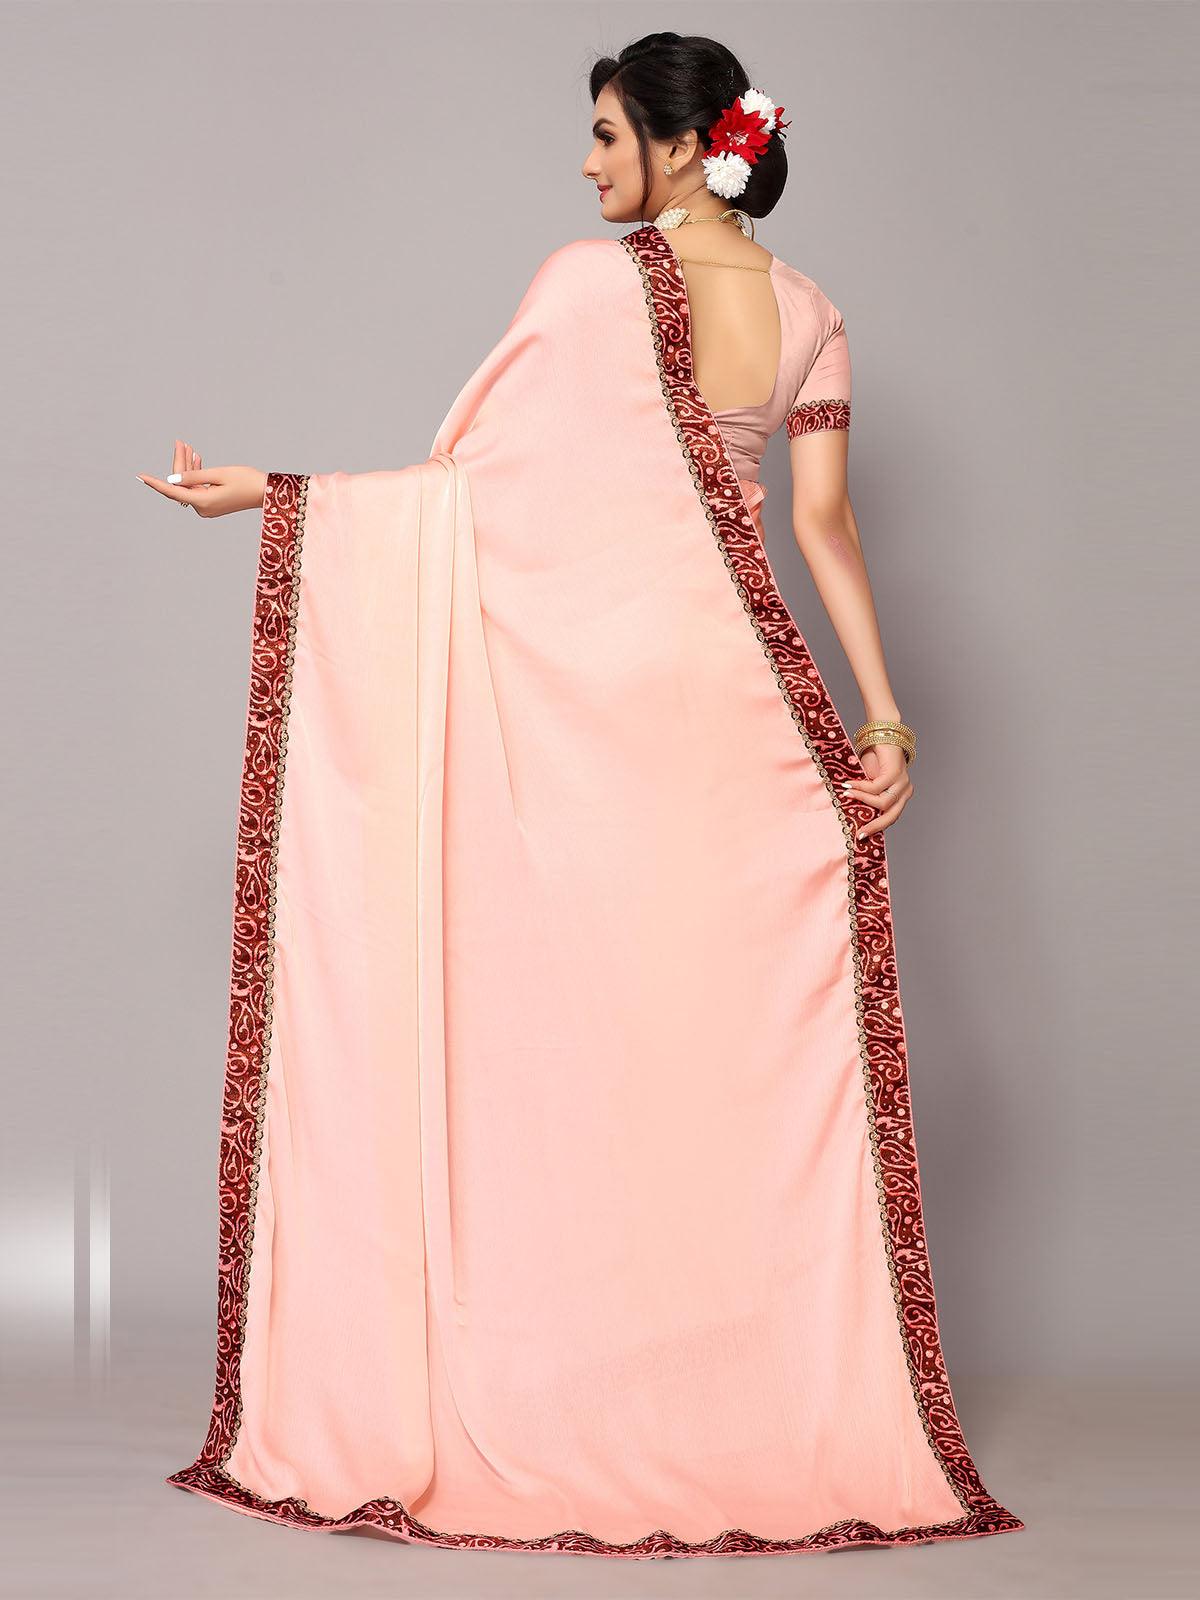 Women's Peach Chiffion Printed Border Saree With Matching Blouse. - Odette